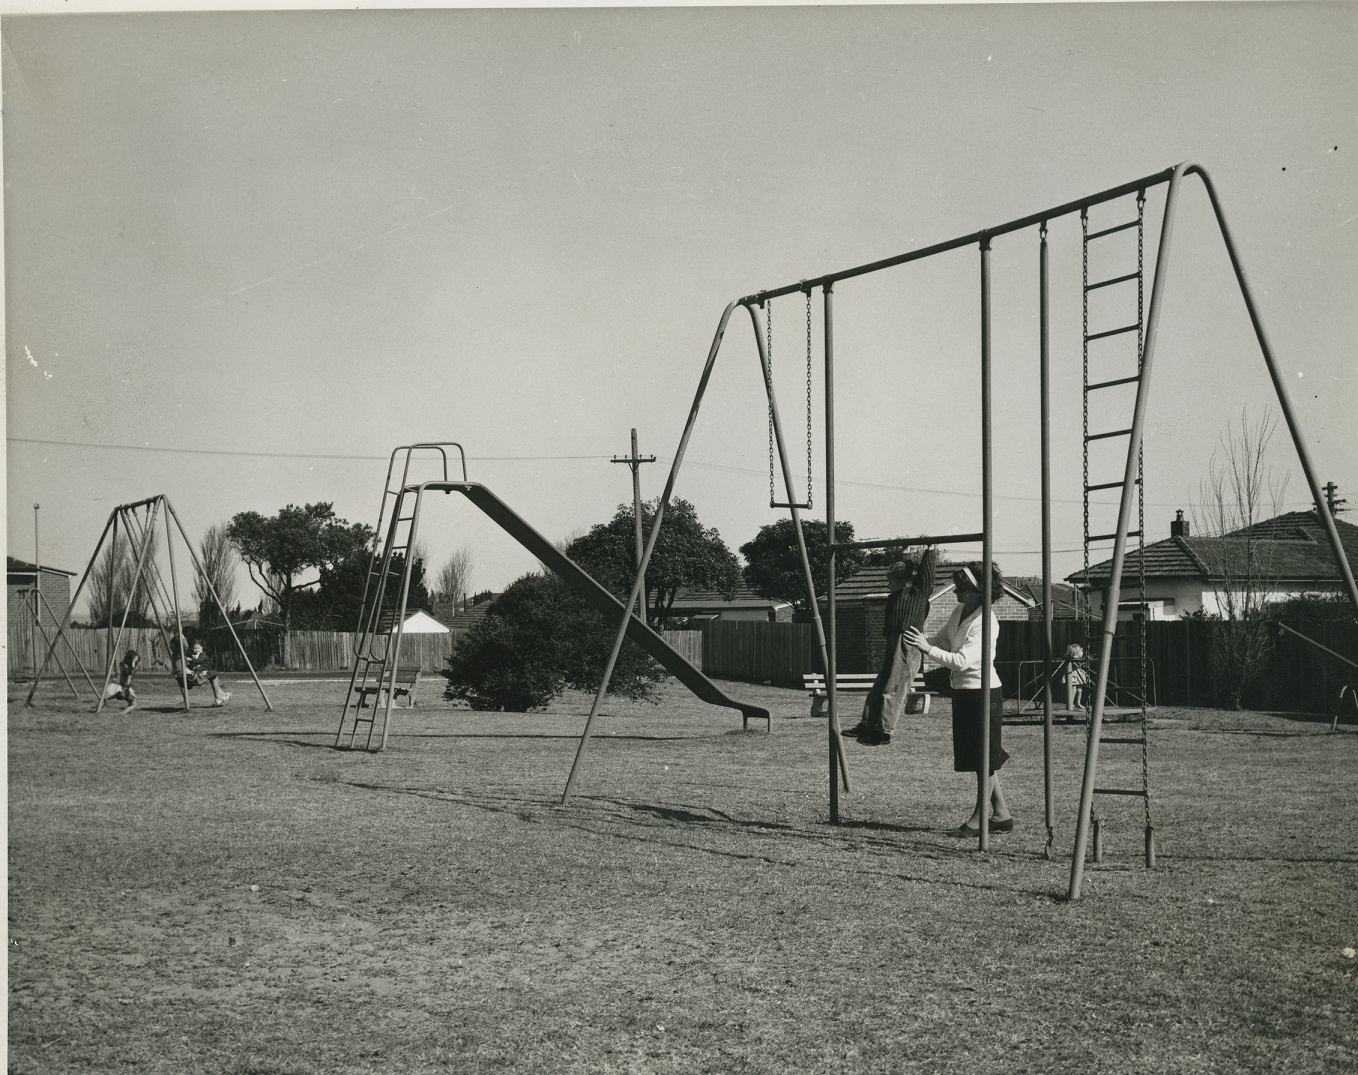 historical photo of children playing on park swings